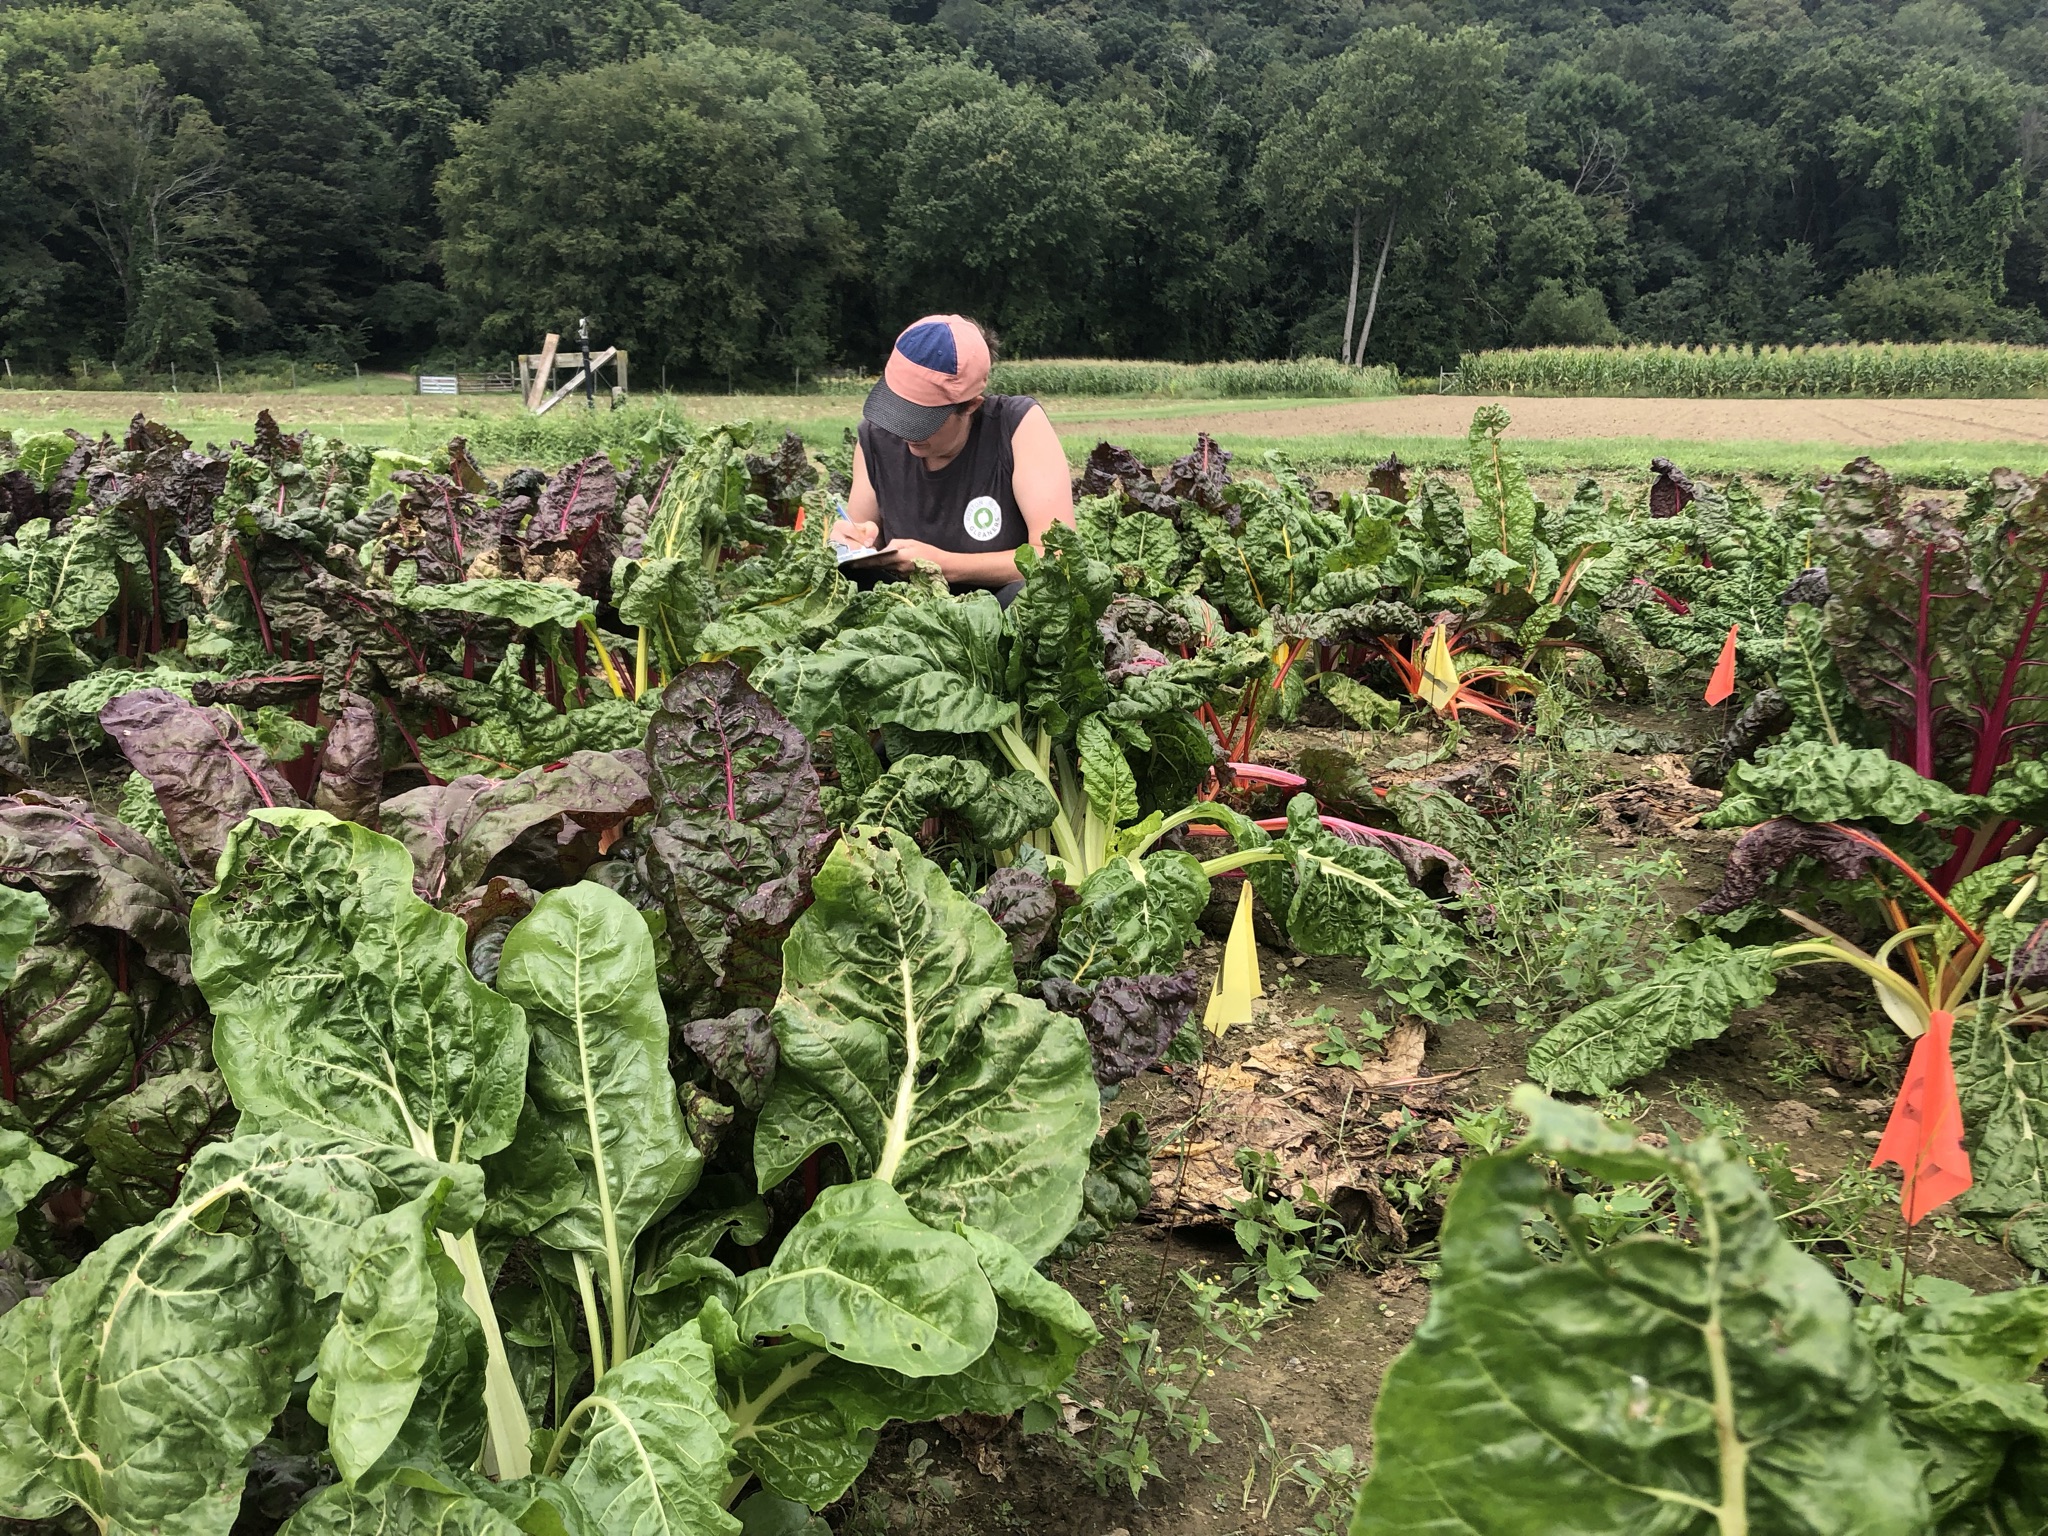 A person crouching in a field of Swiss chard leaves, writing on a clipboard.